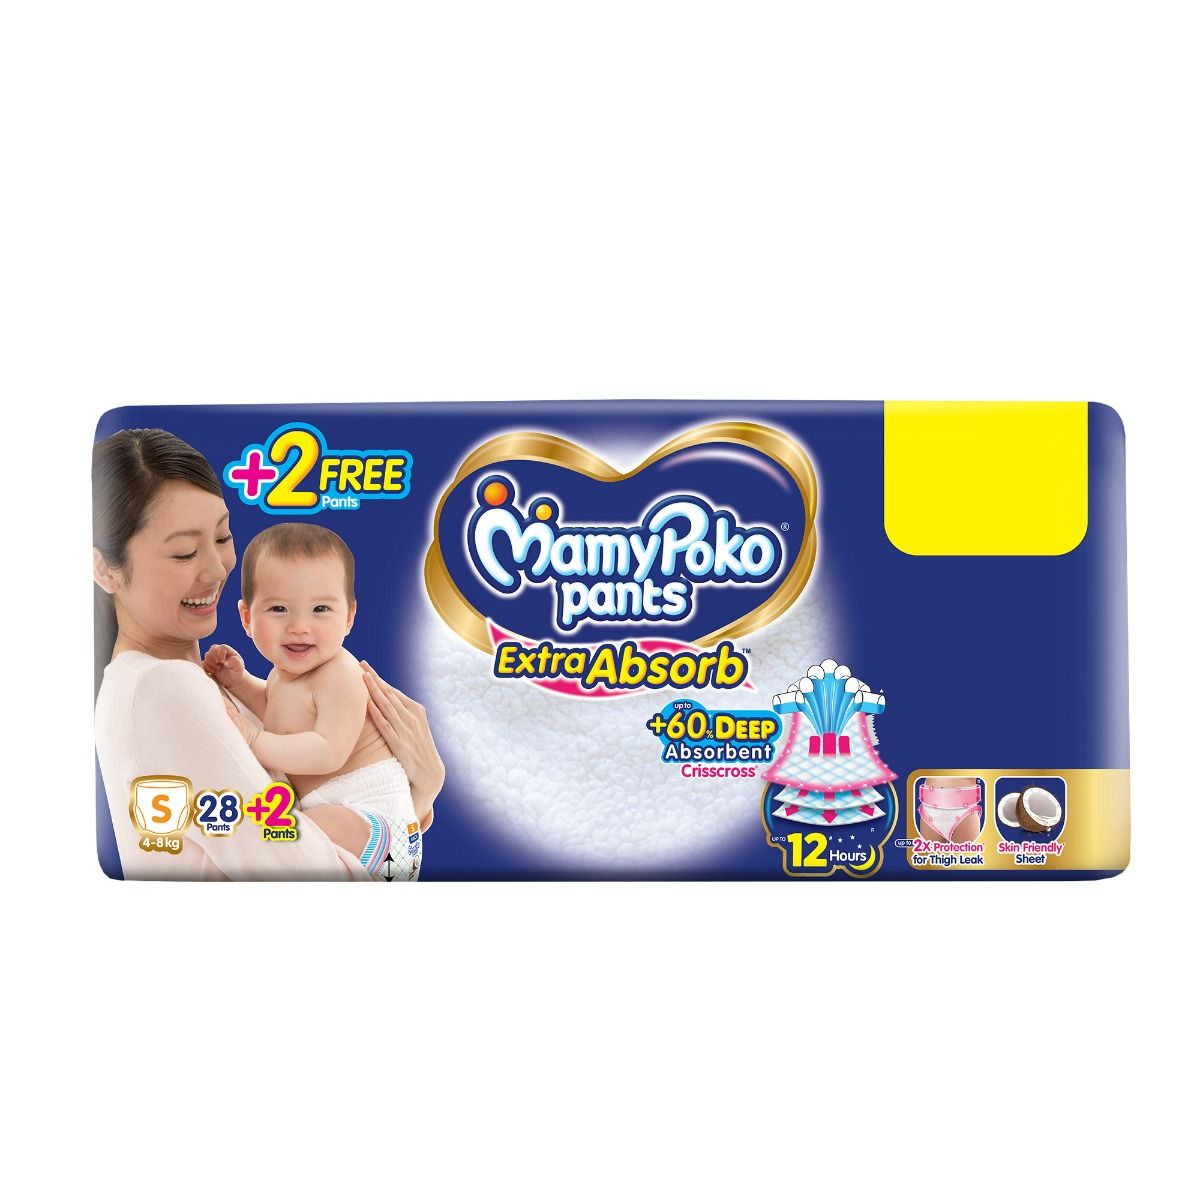 MamyPoko Pants Diaper Extra Absorb Pant S (4-8 kg) - Online Grocery  Shopping and Delivery in Bangladesh | Buy fresh food items, personal care,  baby products and more